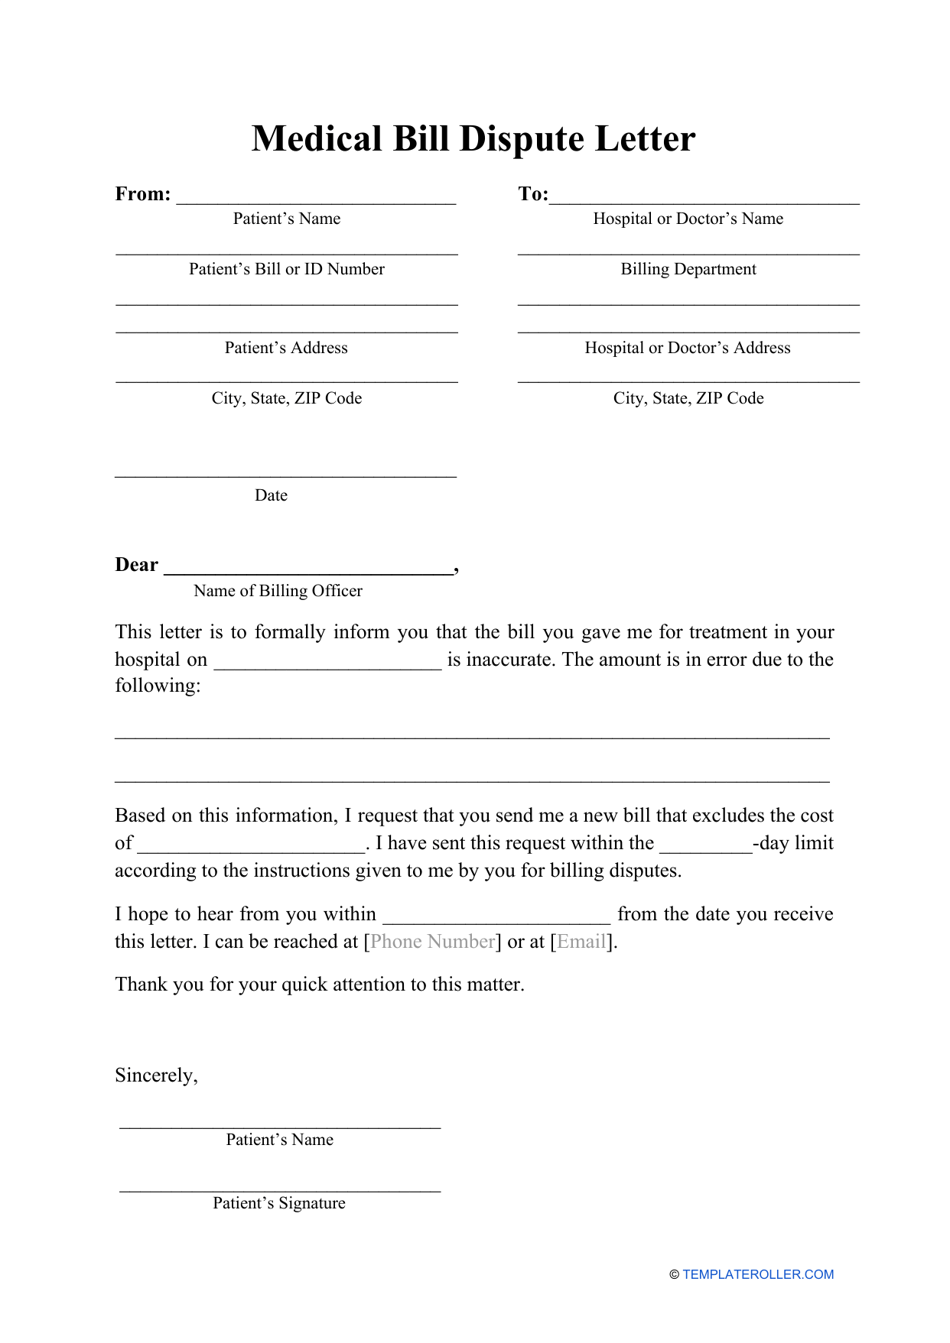 Medical Bill Dispute Letter Template Download Printable PDF Within Credit Report Dispute Letter Template